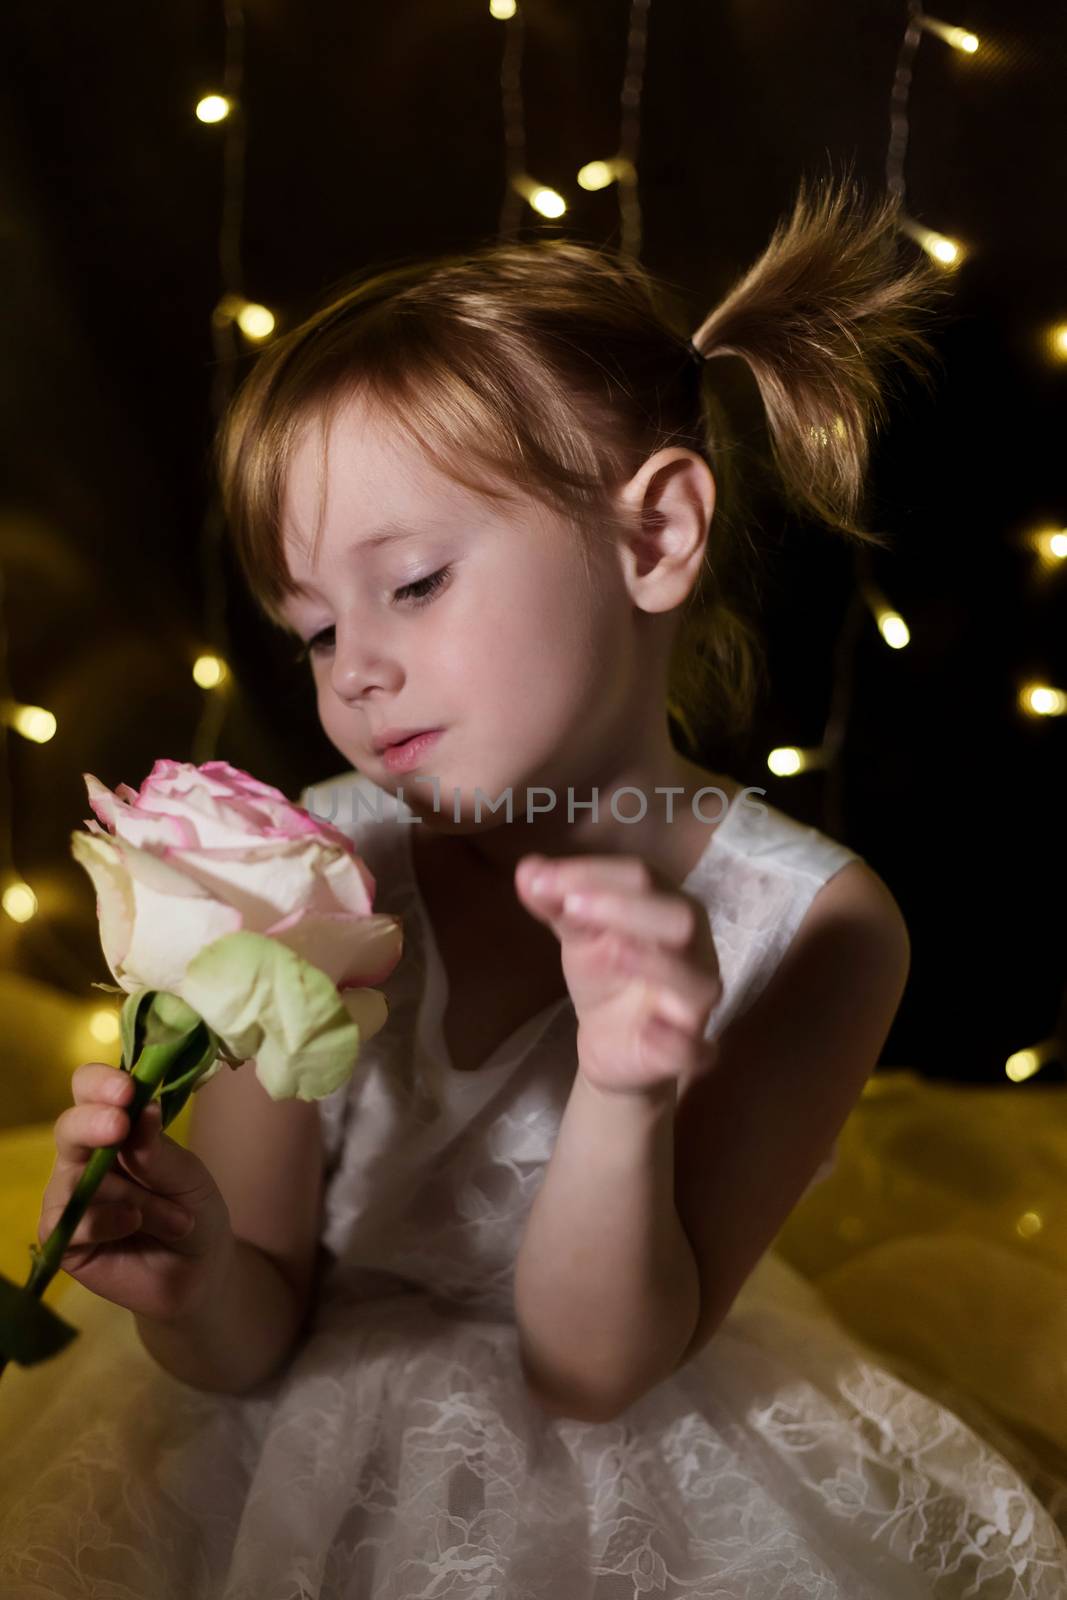 Adorable little girl with pink rose flower is posing in christmas lights by galinasharapova